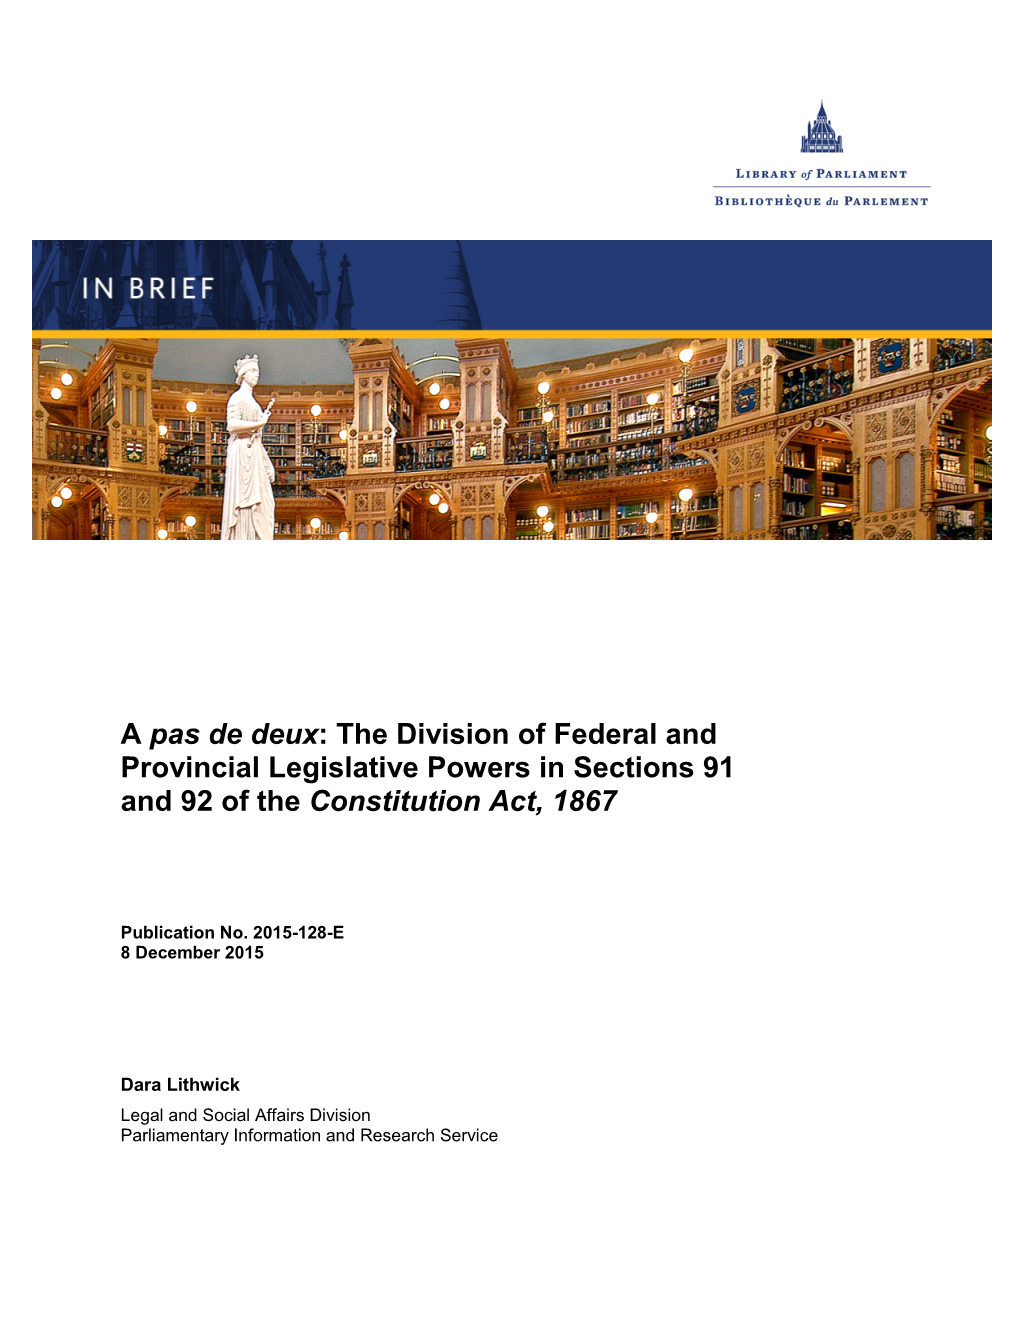 The Division of Federal and Provincial Legislative Powers in Sections 91 and 92 of the Constitution Act, 1867